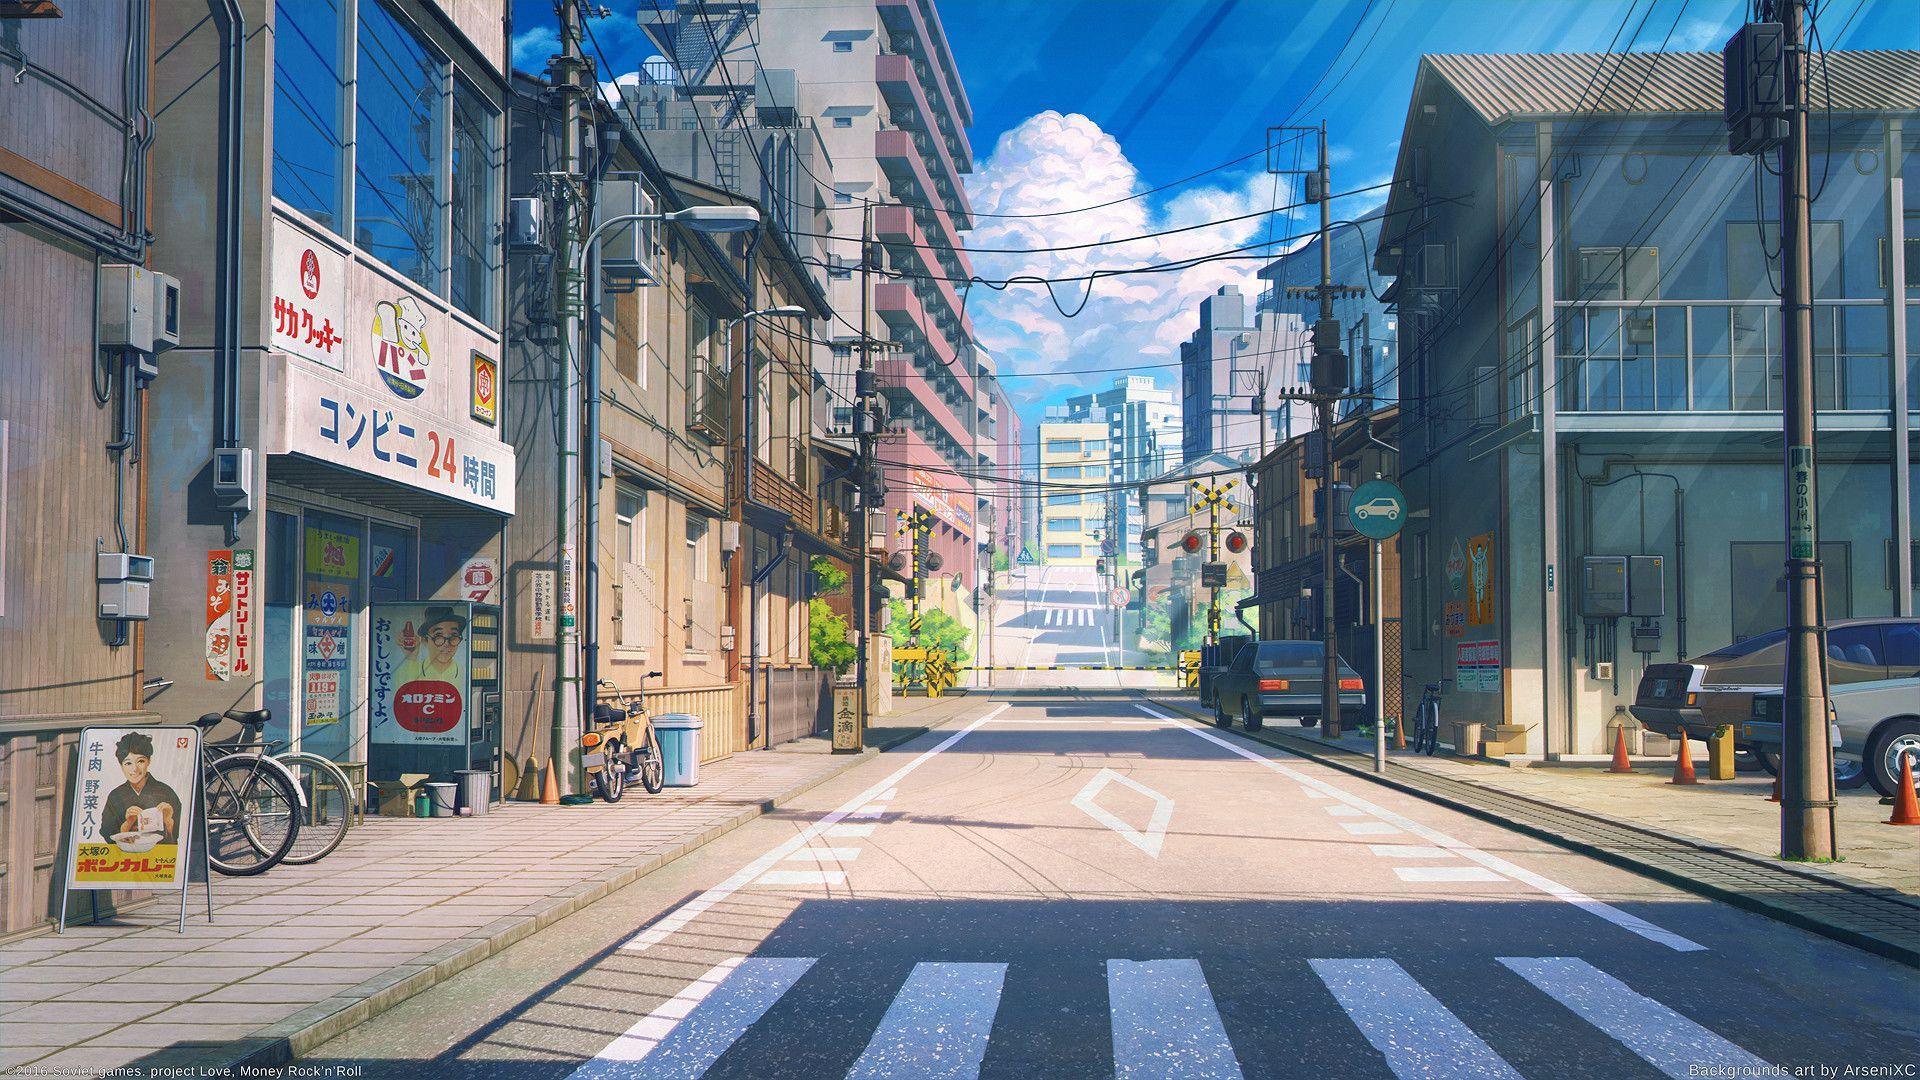 Japan In The 1980s. Anime scenery wallpaper, Anime city, Anime background